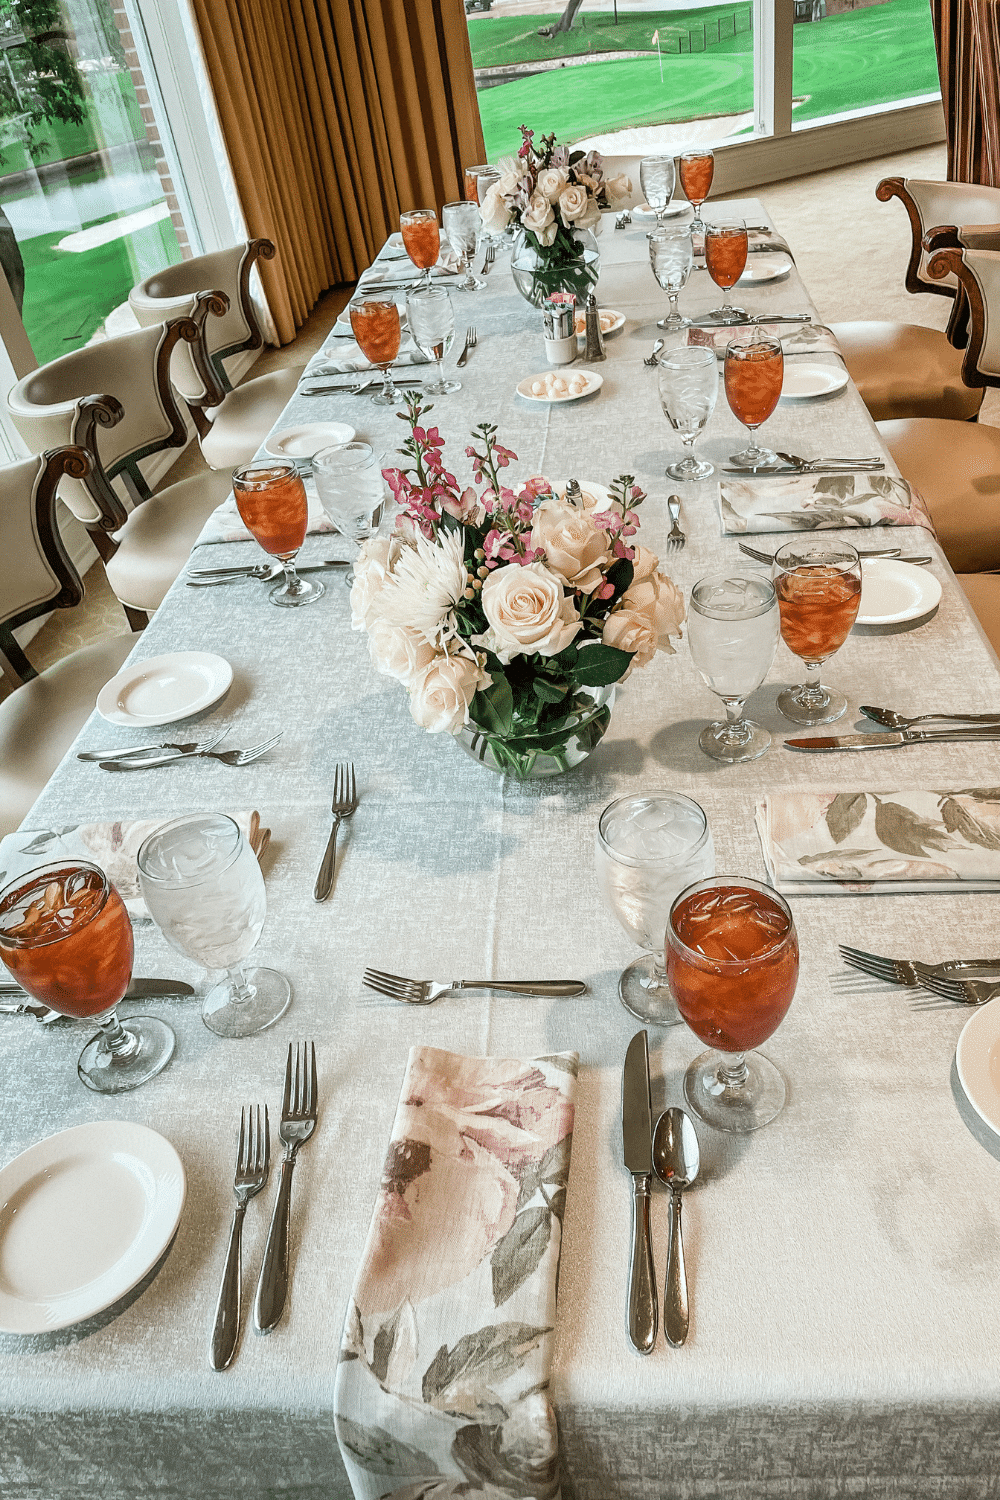 My Beautiful Bridal Luncheon - Hanzastephens | All the Details!